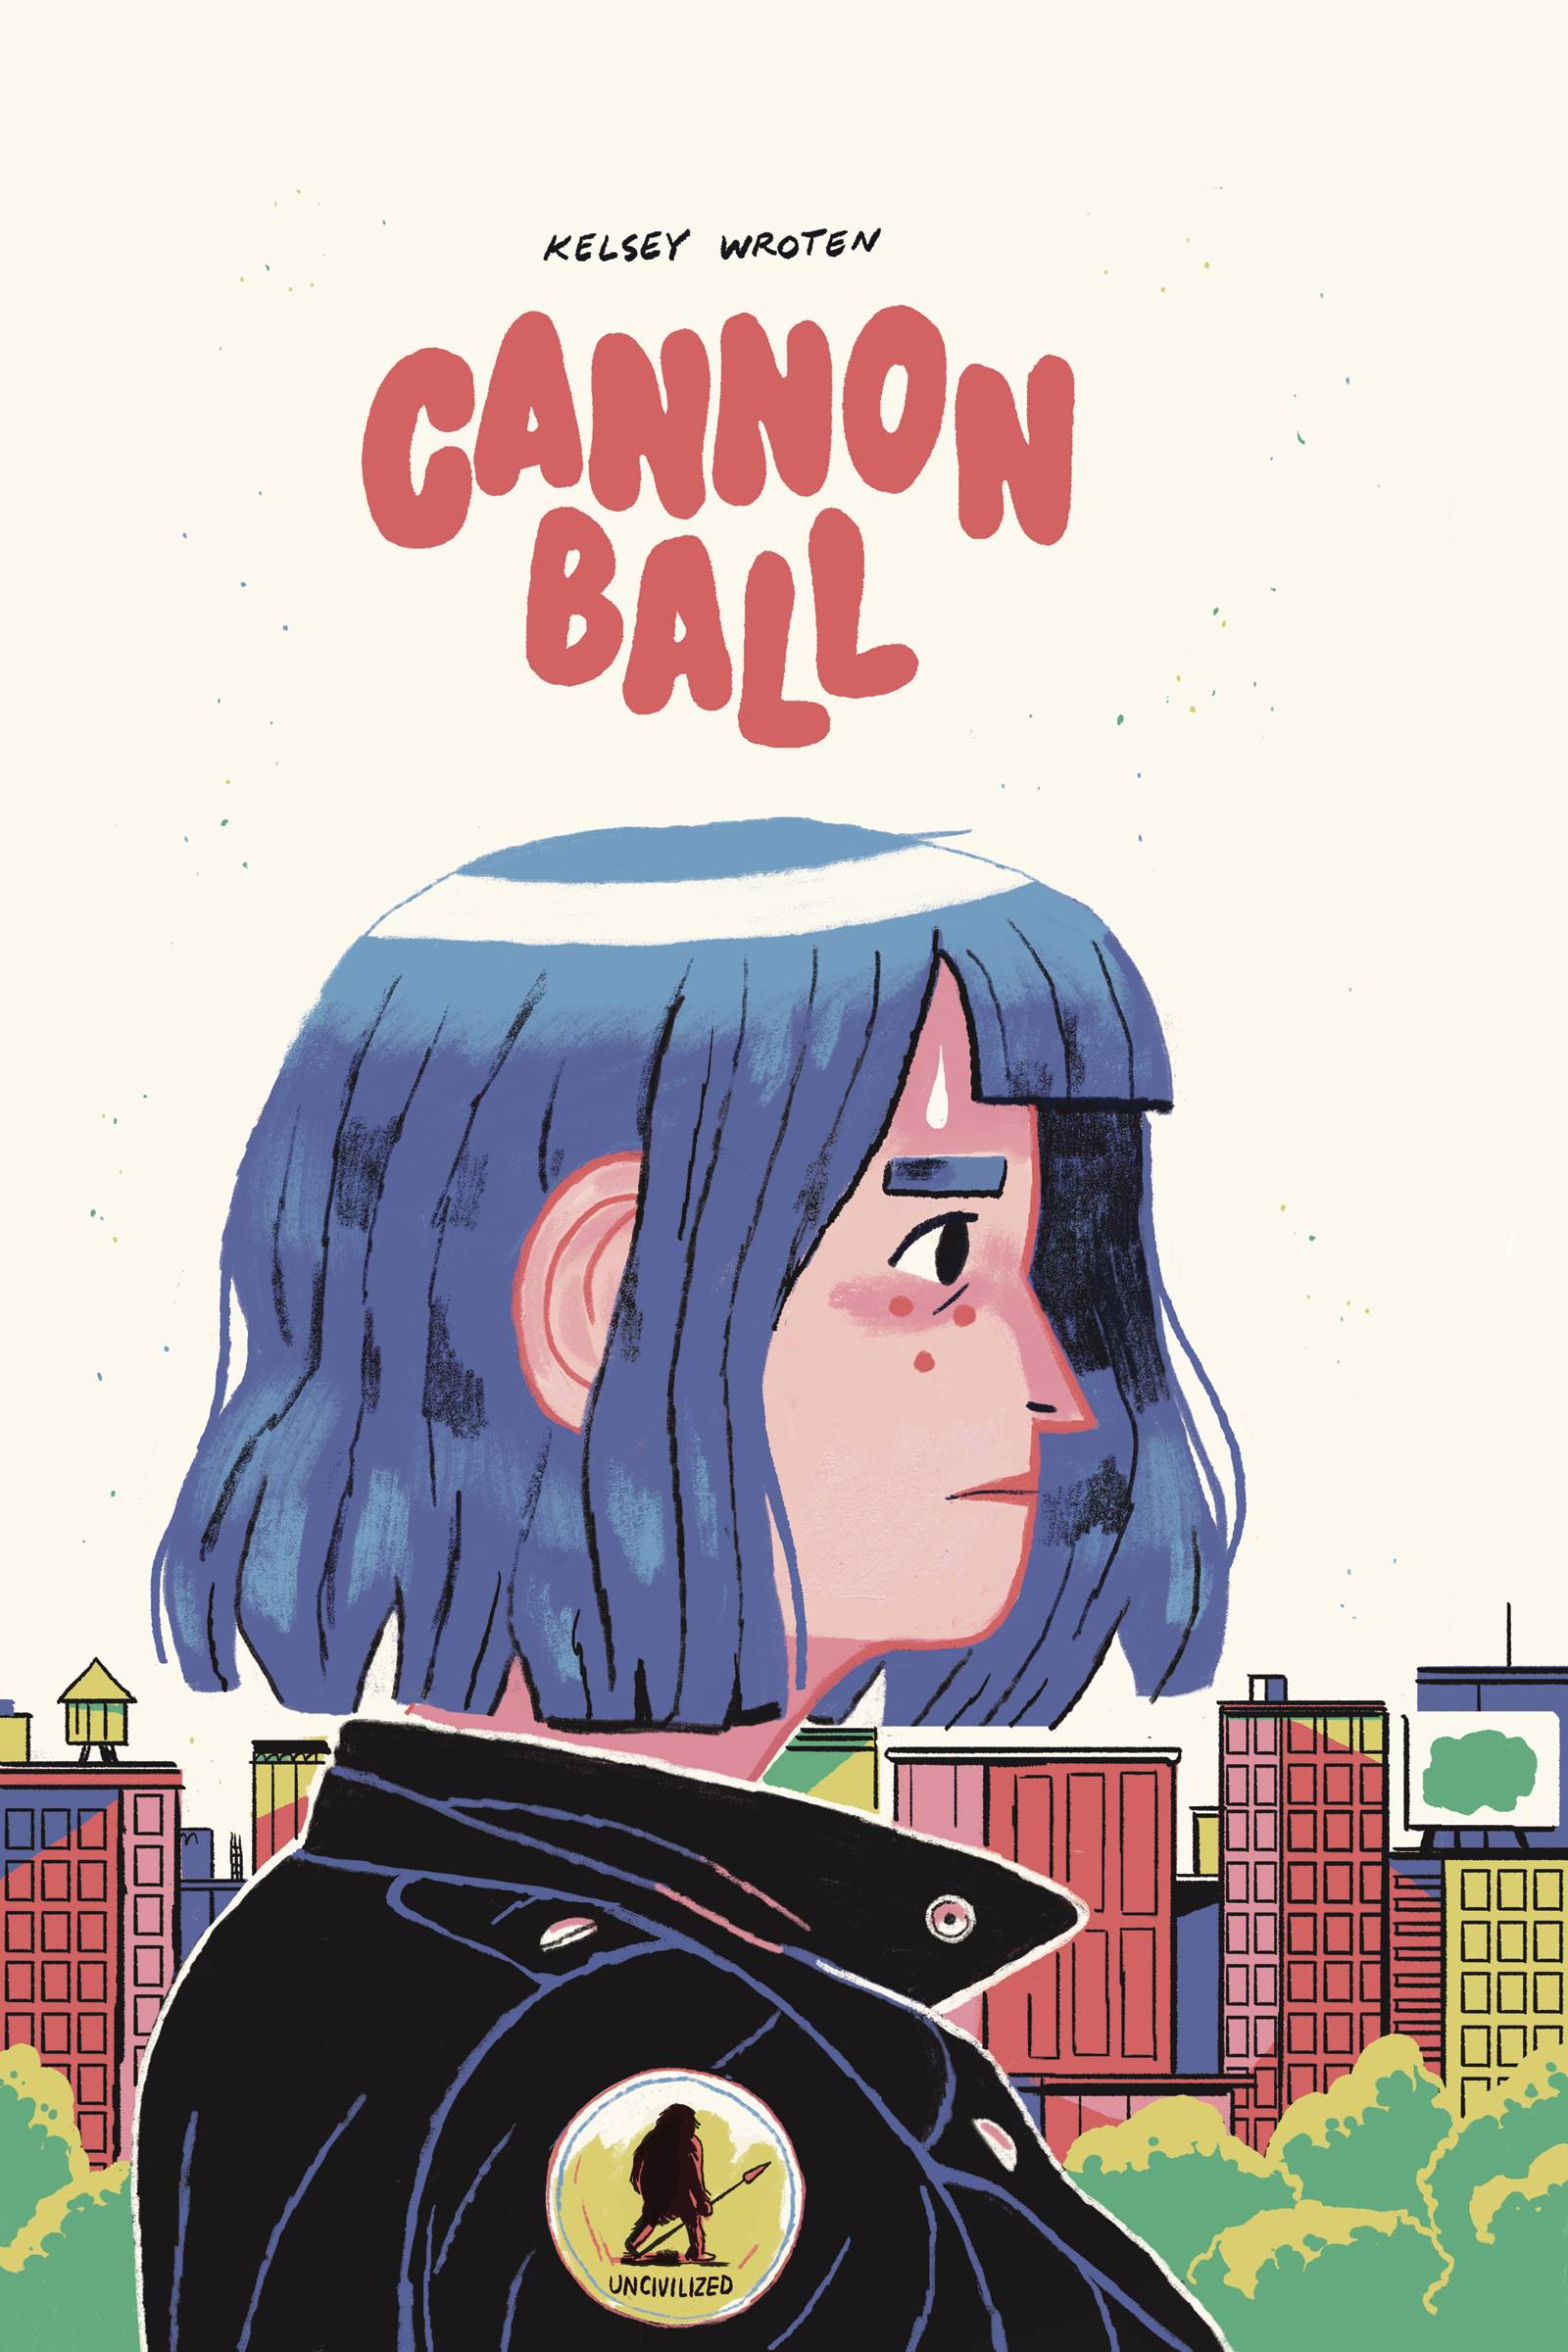 Cannonball h/c